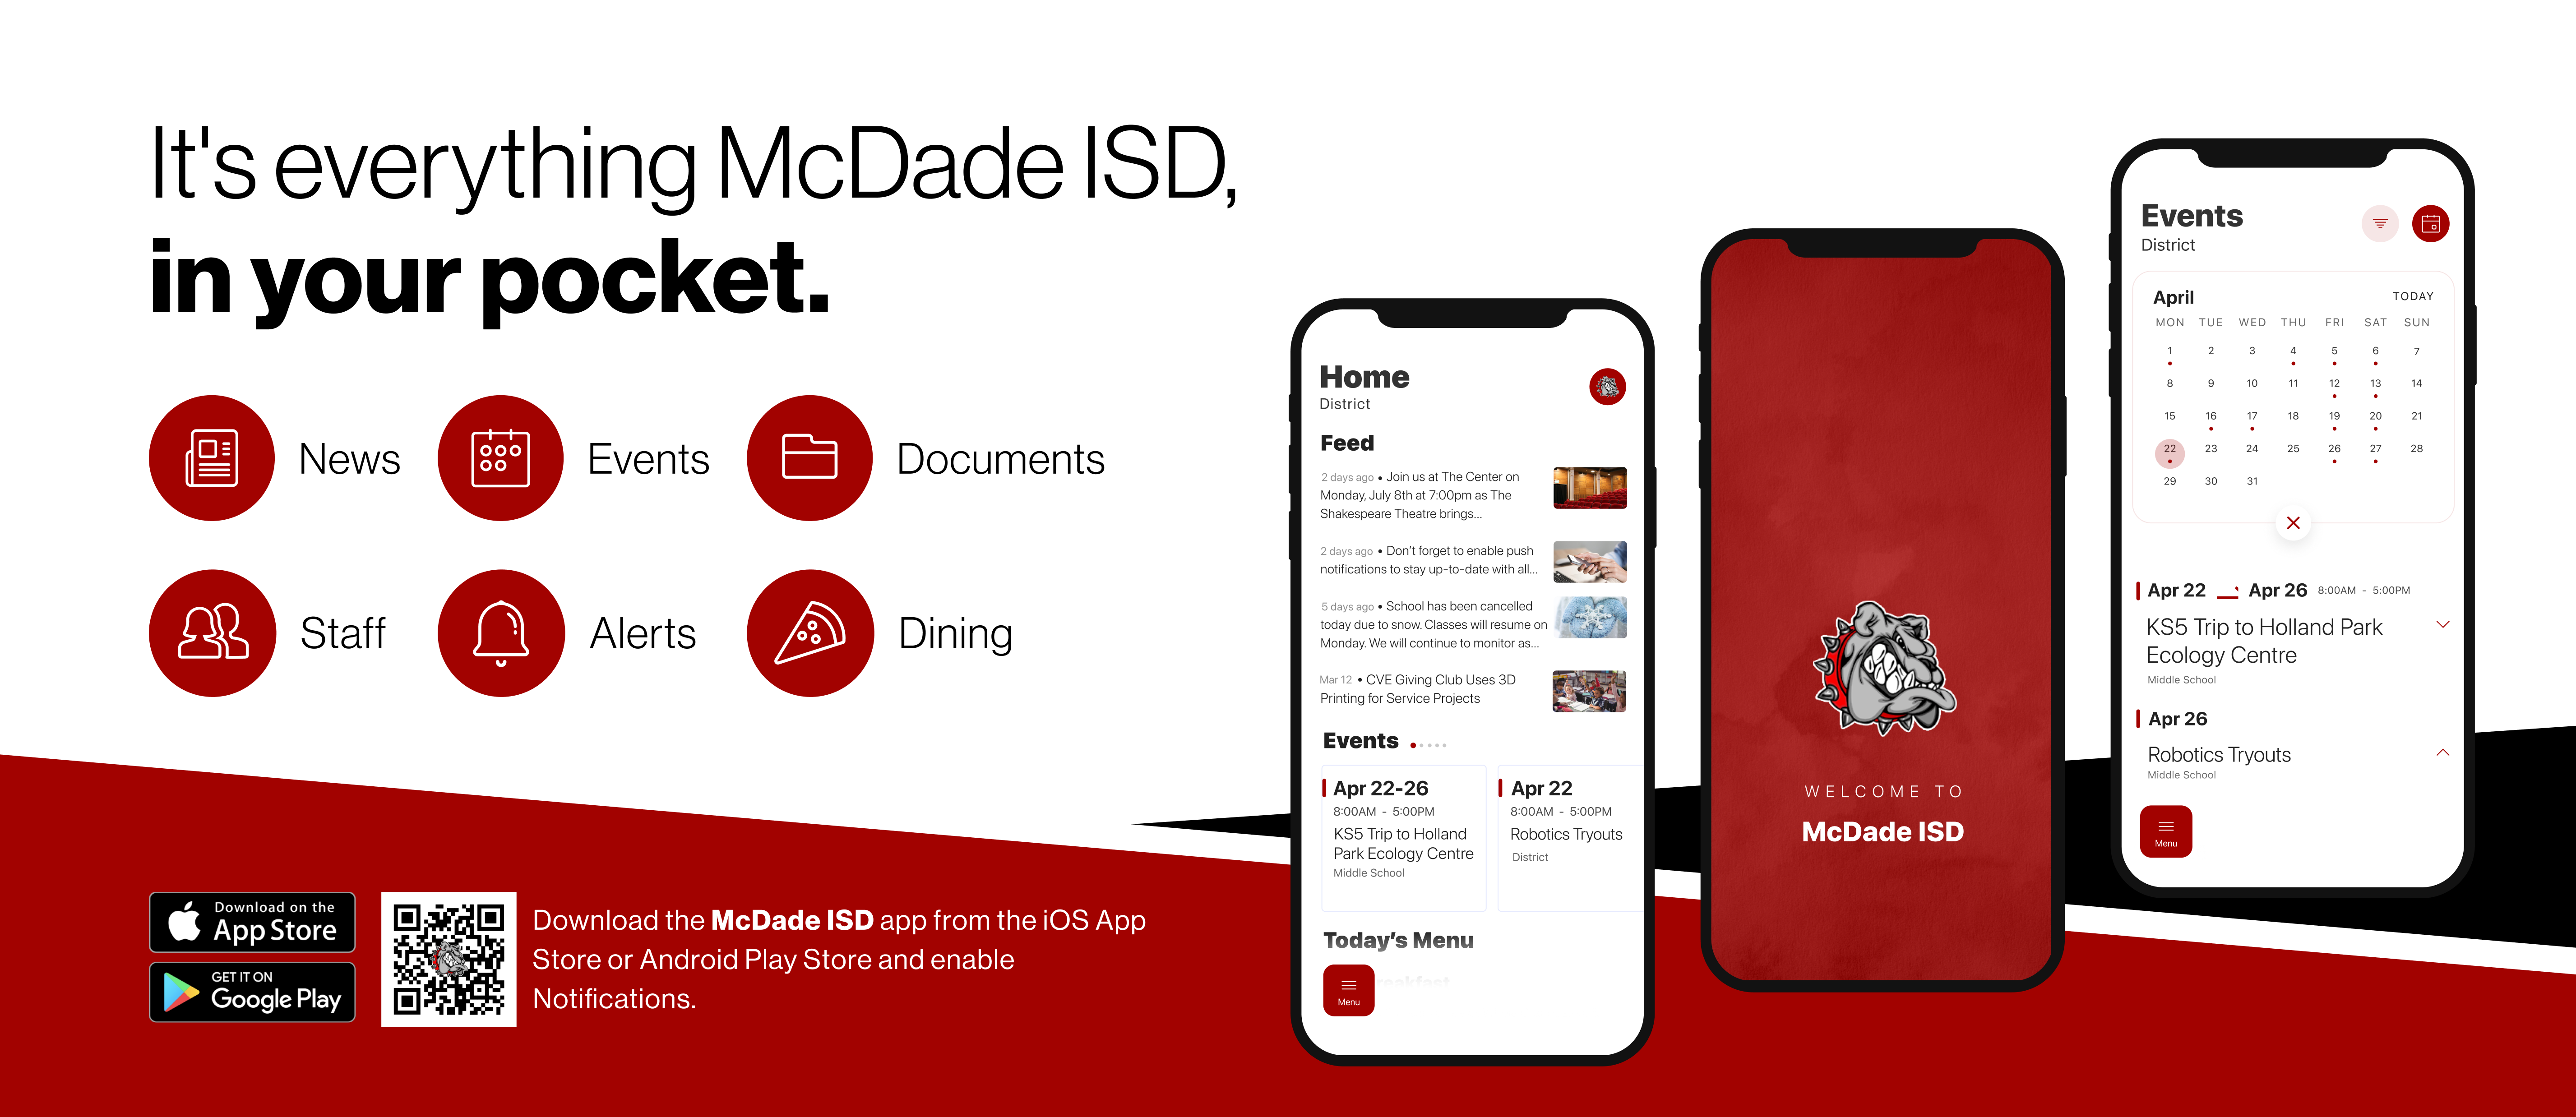 It's everything McDade ISD in your pocket.